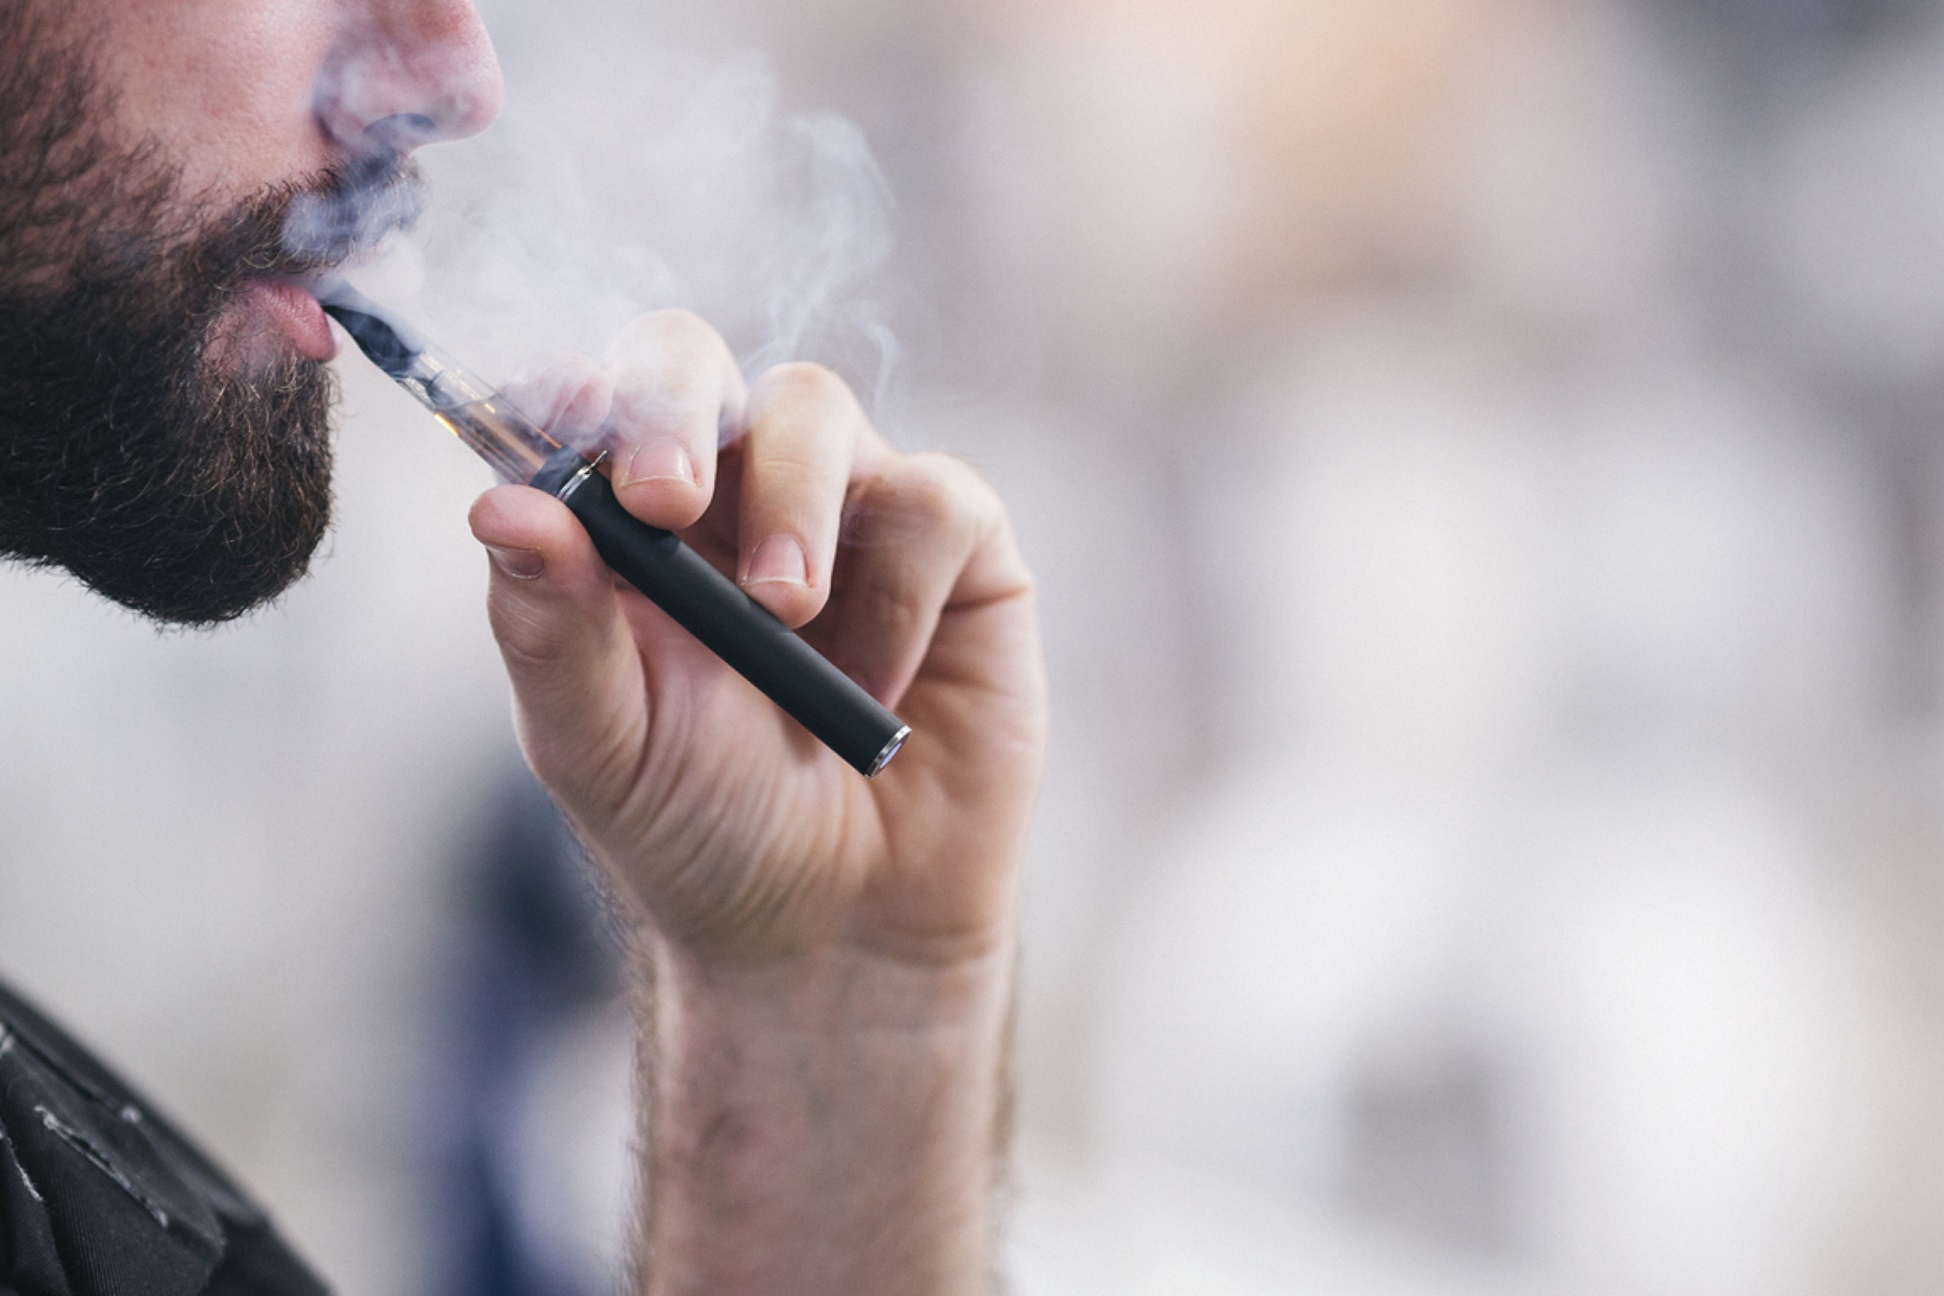 Vaping amendment approved by Council